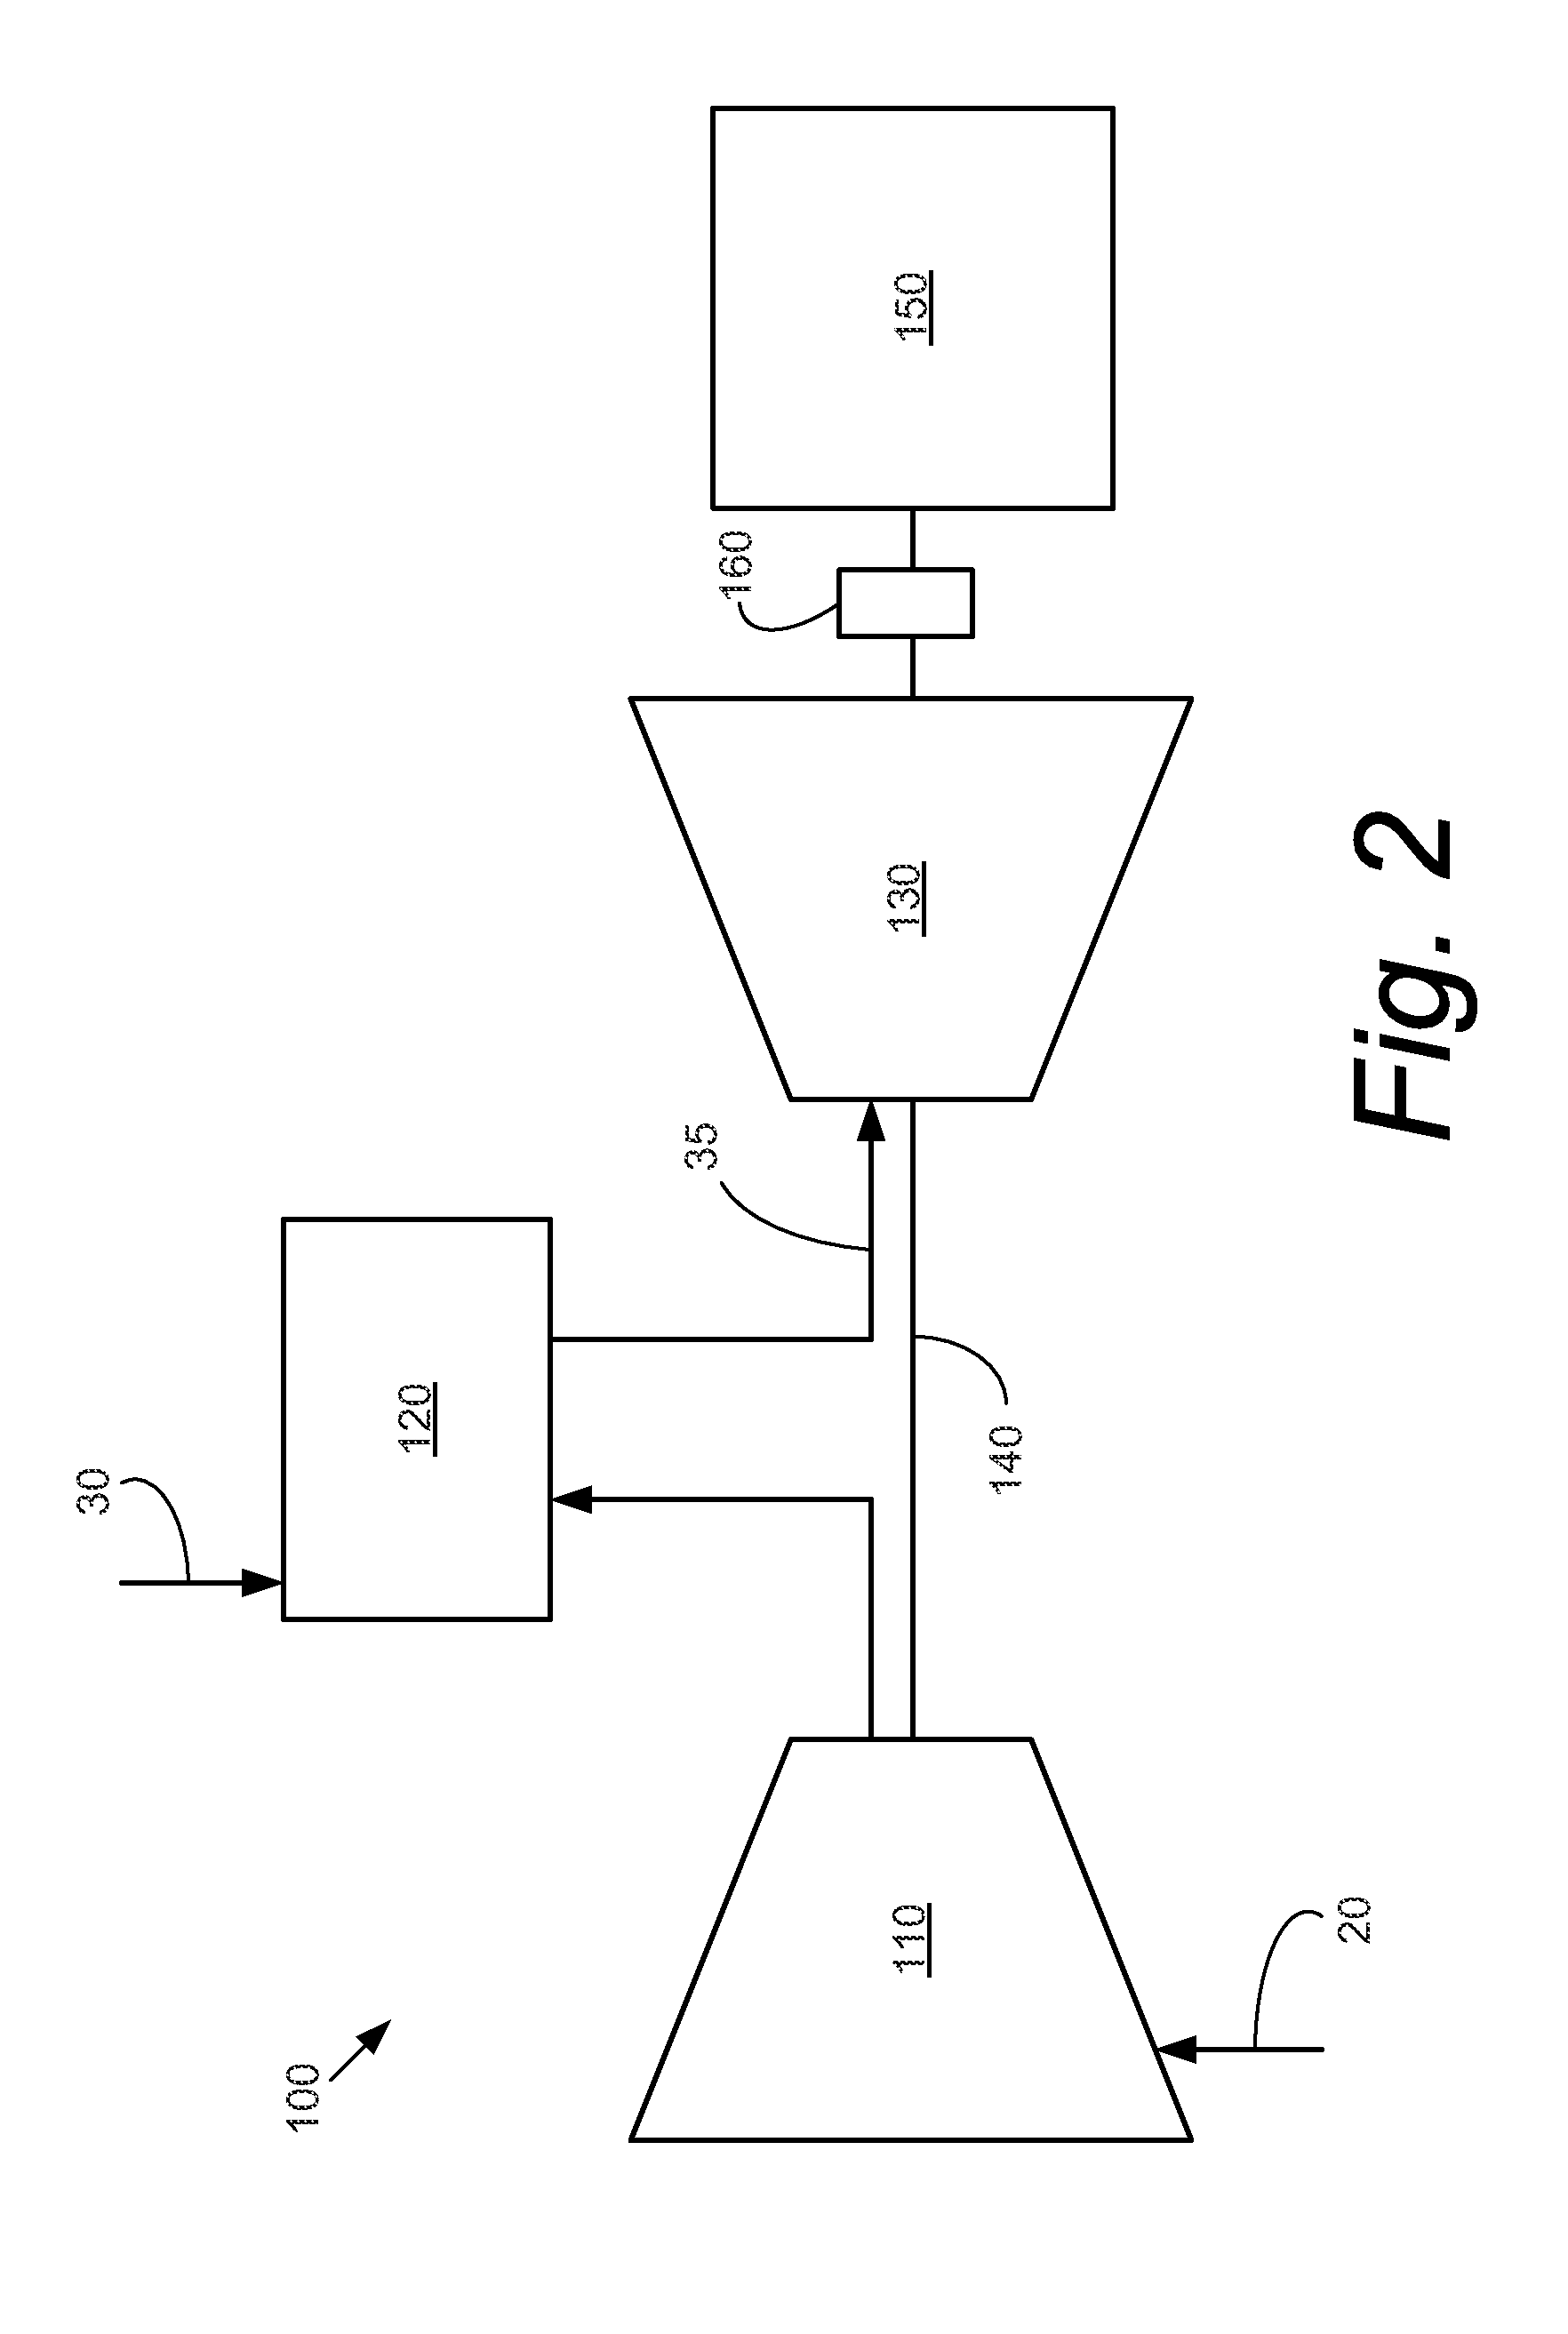 Gas Turbine Engine Generator System with Torsional Damping Coupling